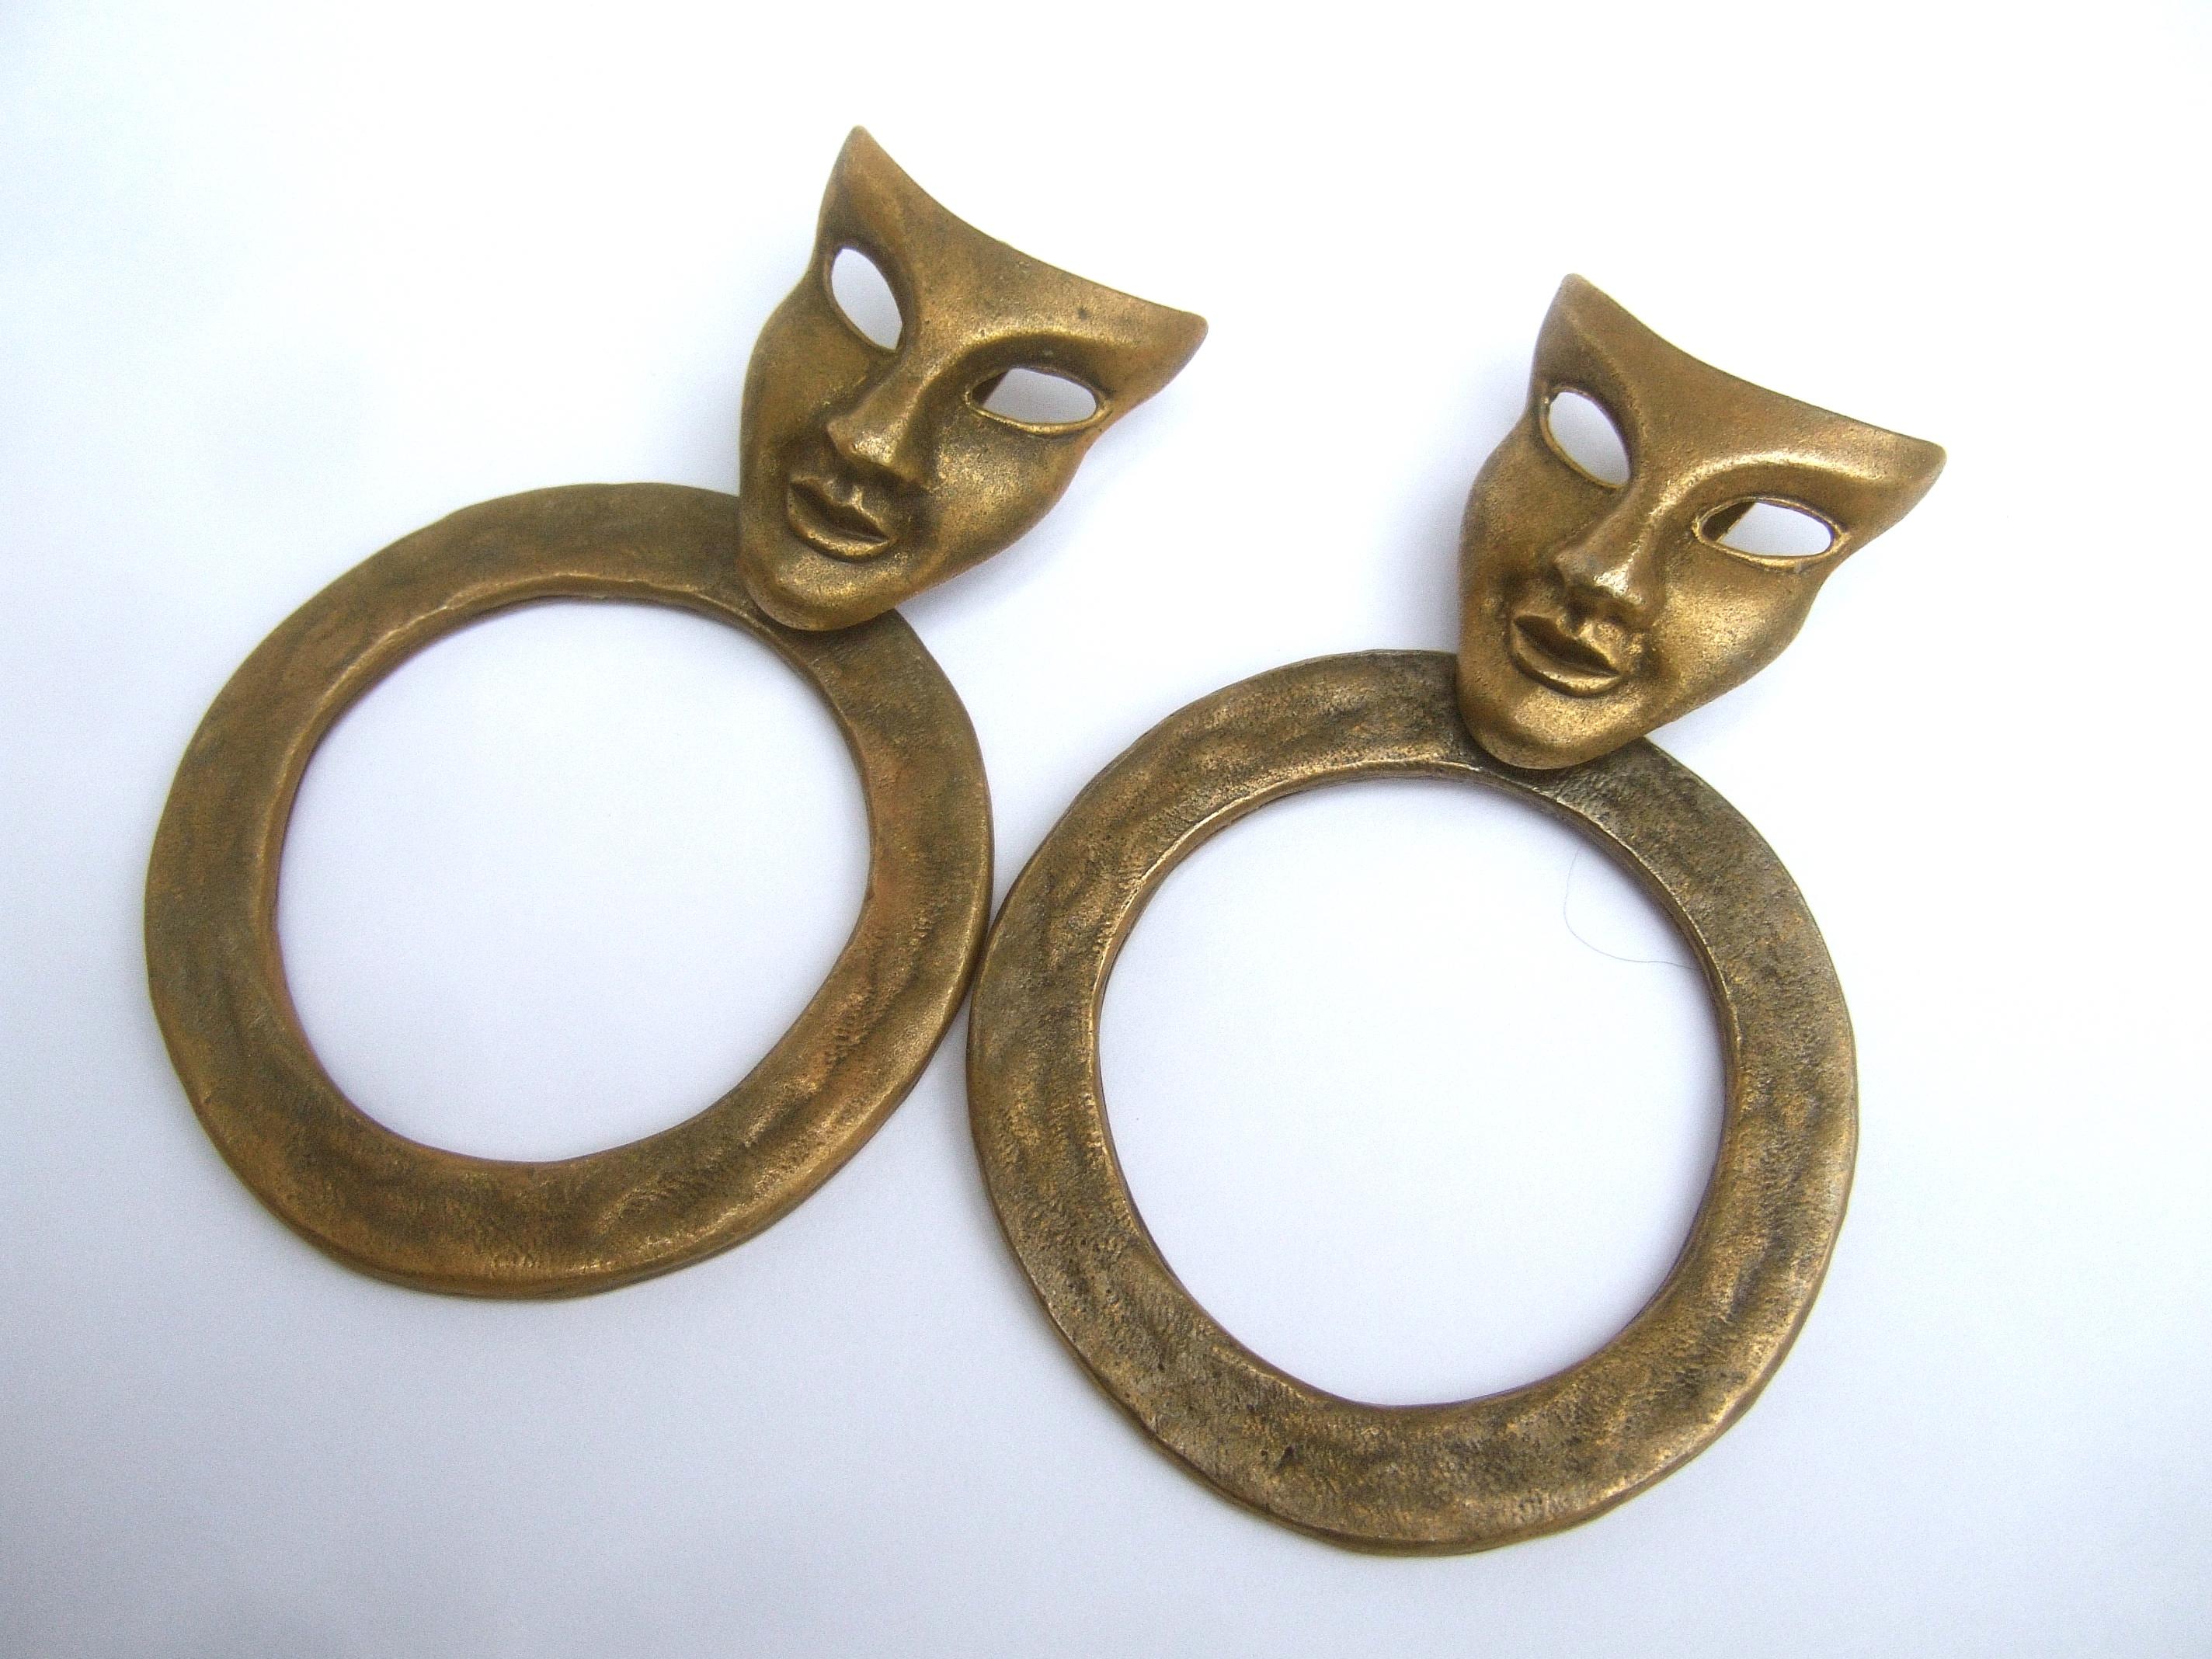 Avant-garde large-scale clip-on statement earrings designed by Les Bernard c 1980s
The unique large-scale earrings are designed with an androgynous mask; paired with an articulated circular flattened hoop ring; suspended underneath the chin 

The